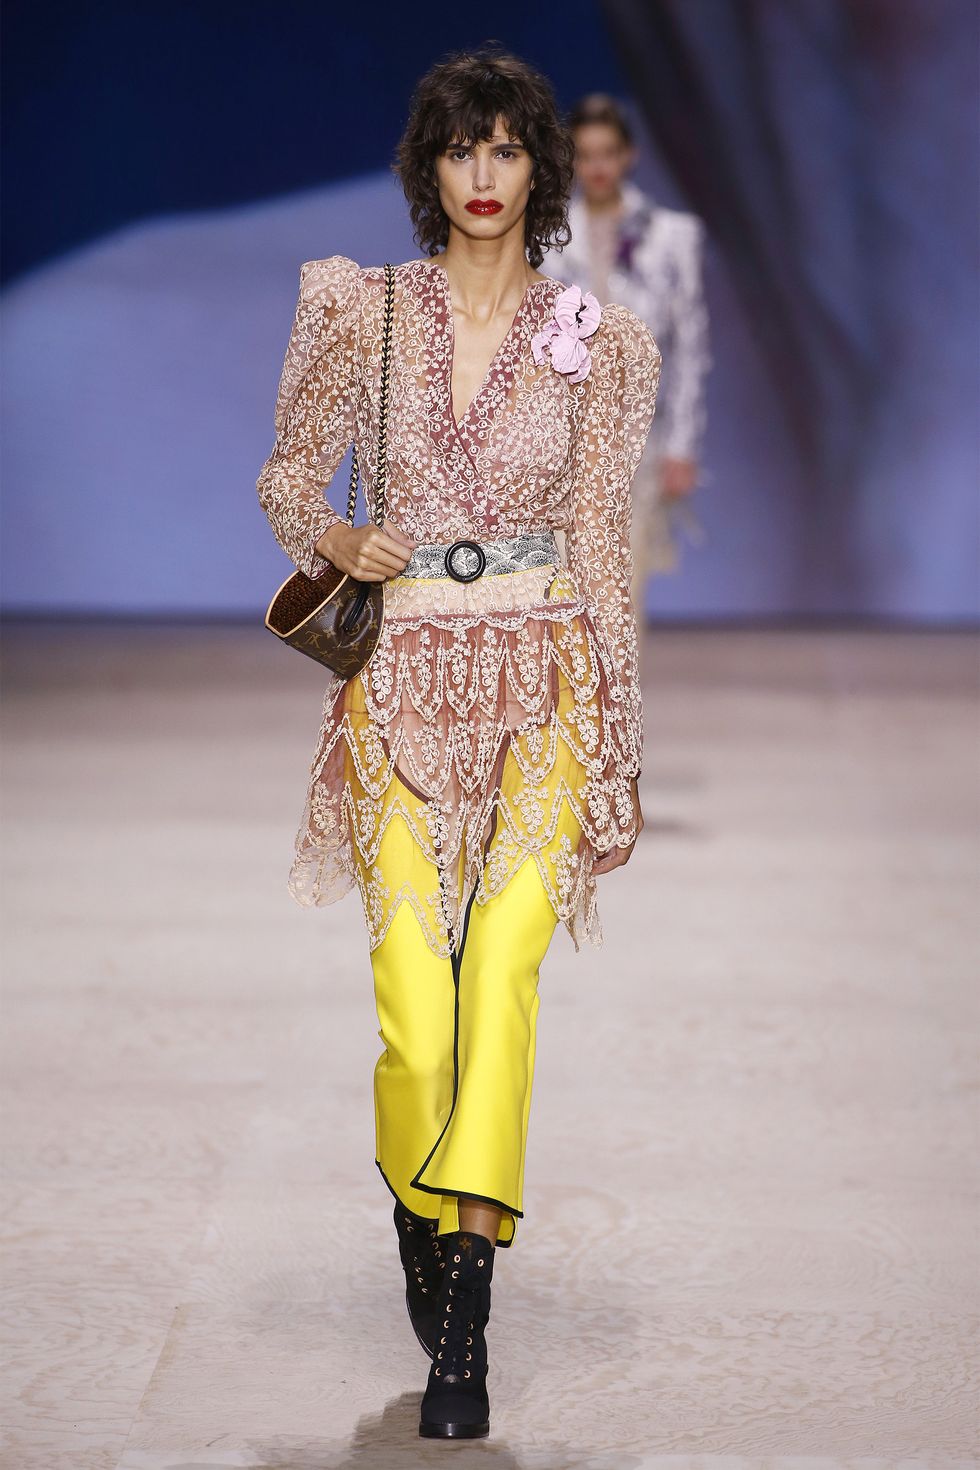 How To Watch Louis Vuitton's Spring 2020 Fashion Show